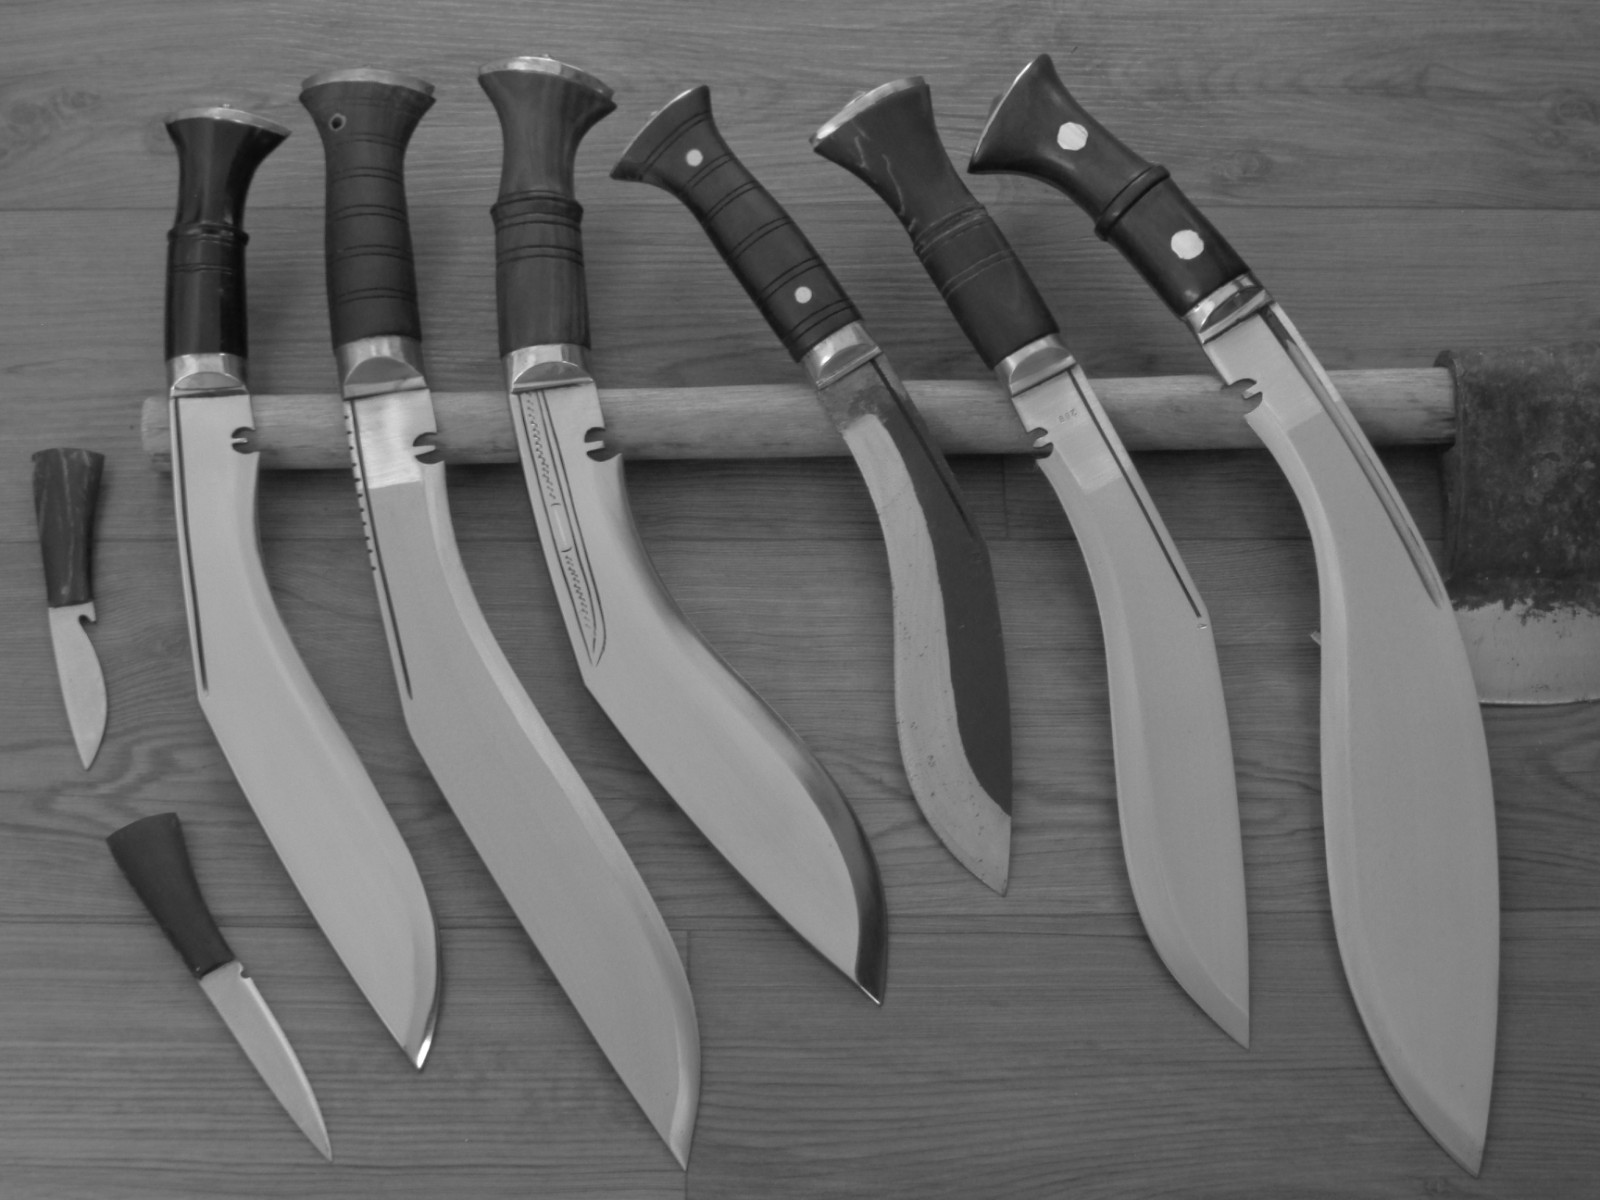 different types of Kukri handle